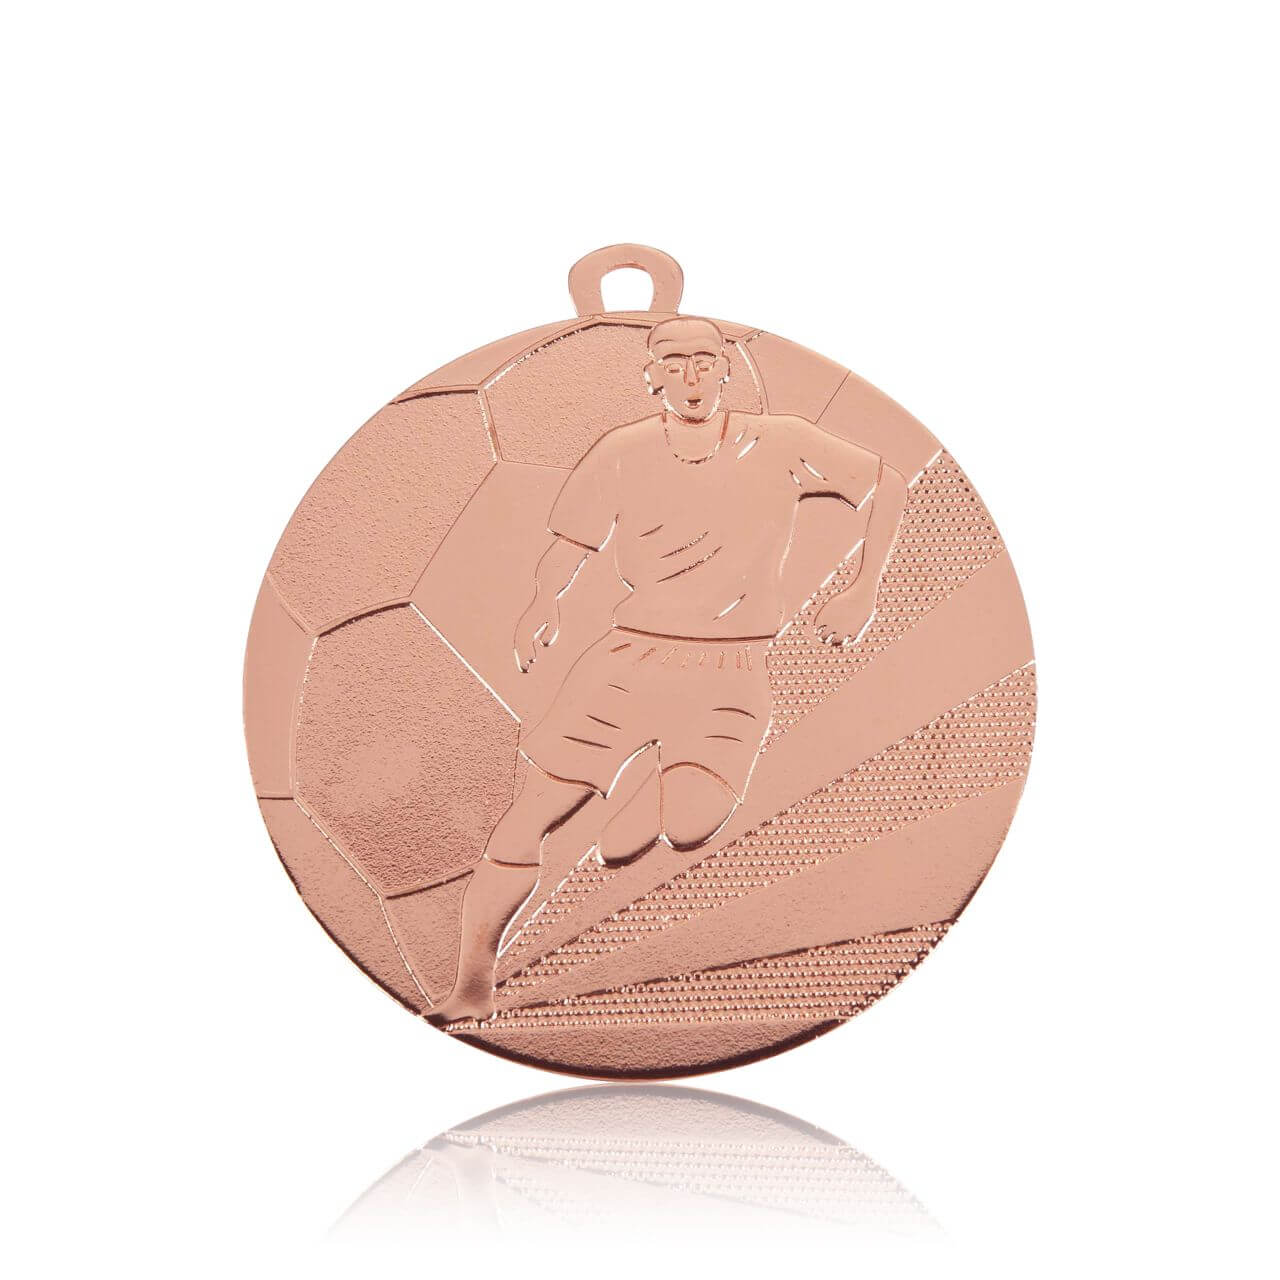 Medaille Fußball 70mm  - Farbe: Bronze